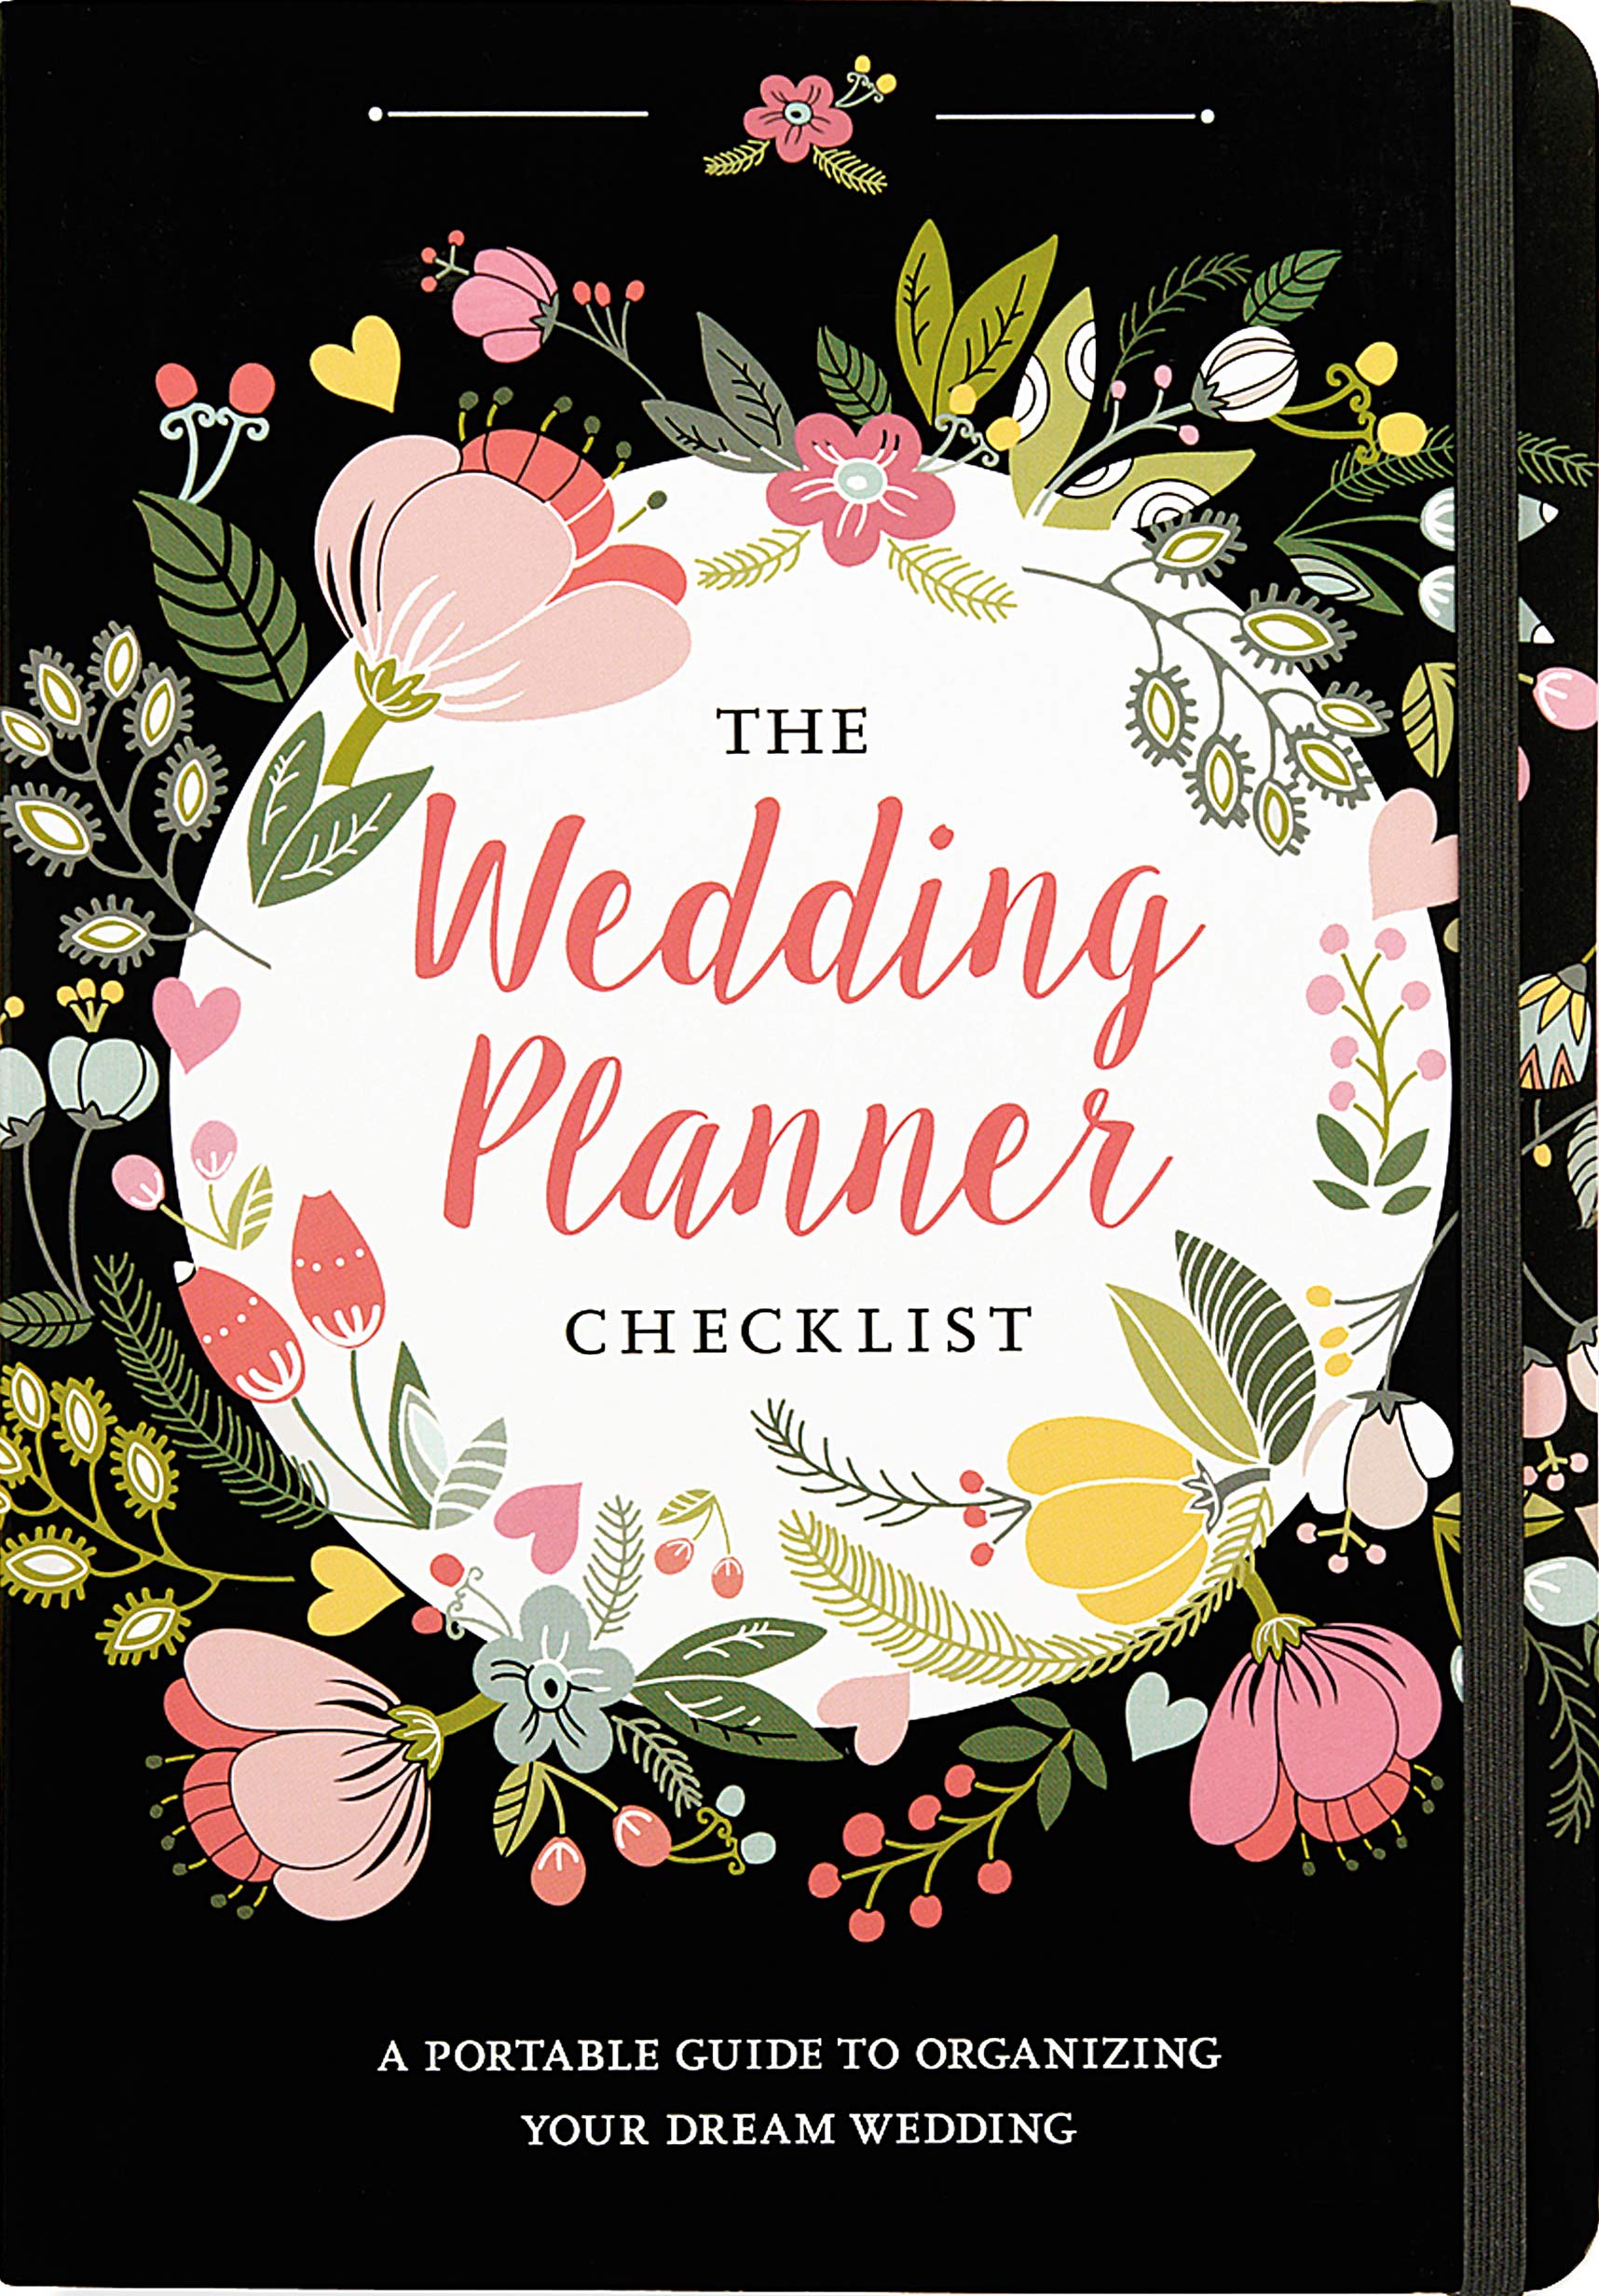 The Wedding Planner Checklist: A Portable Guide to Organizing Your Dream Wedding